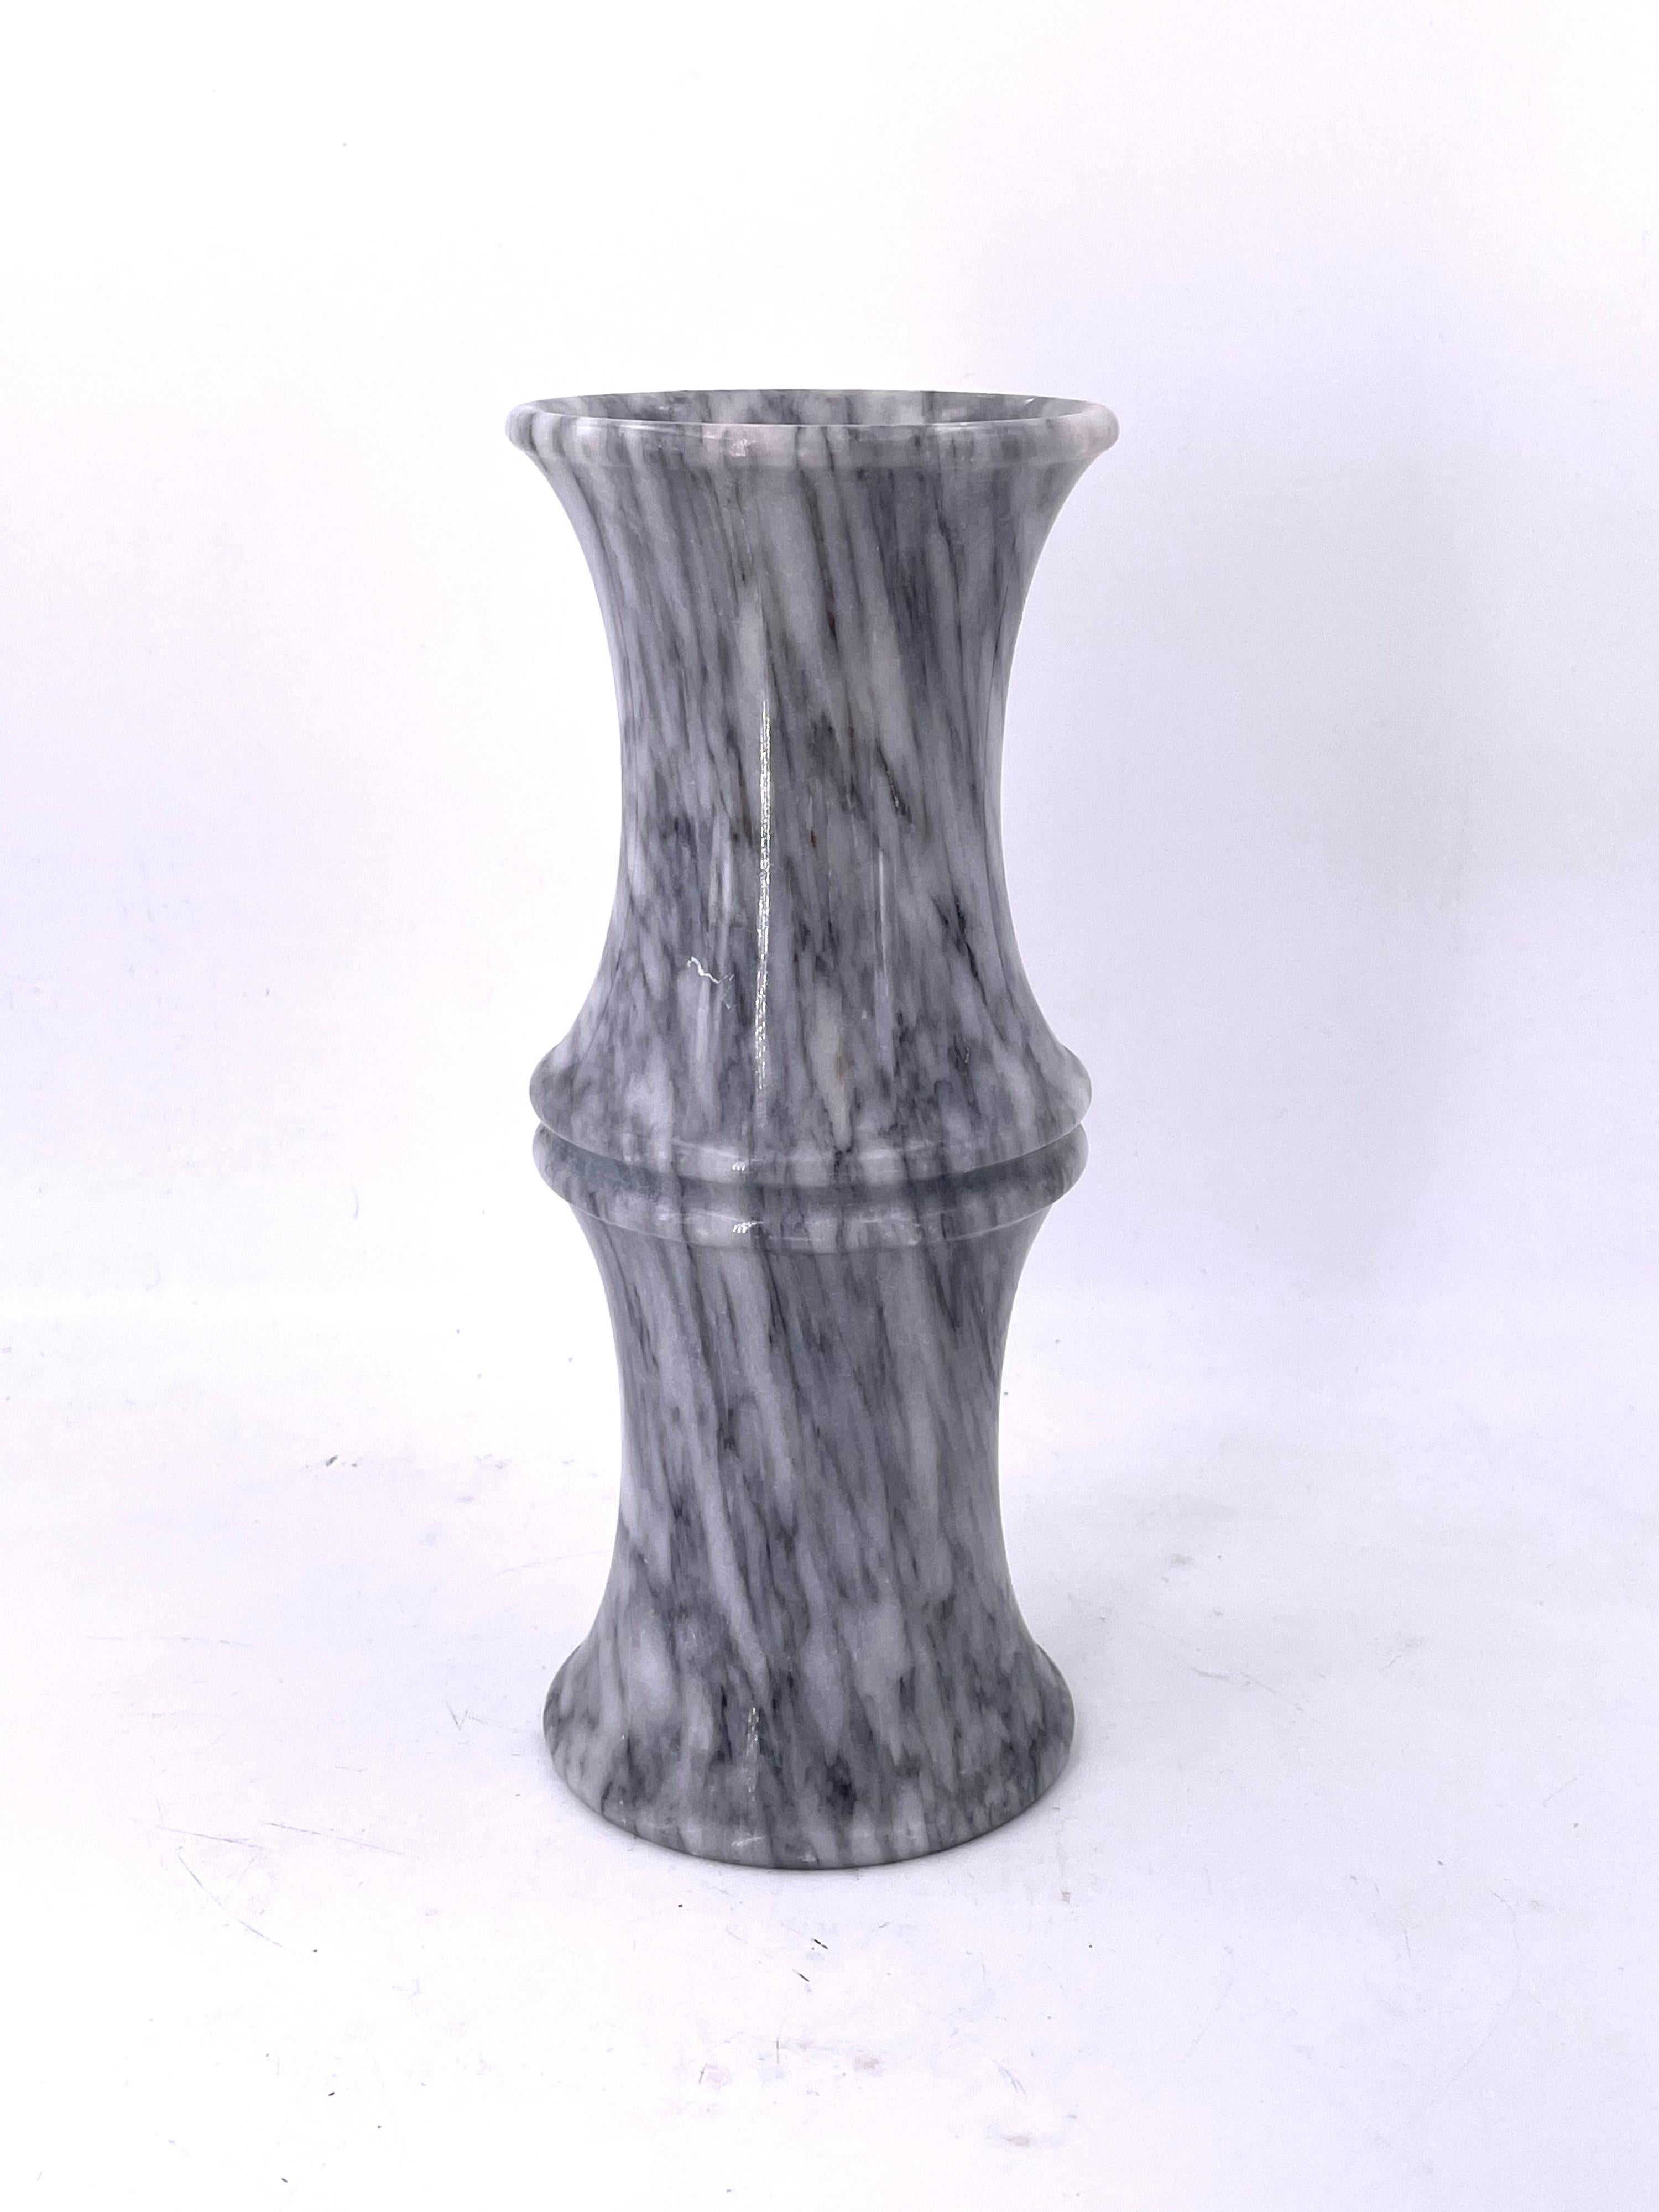 Beautiful grain on this solid marble bamboo shape, circa 1970's.